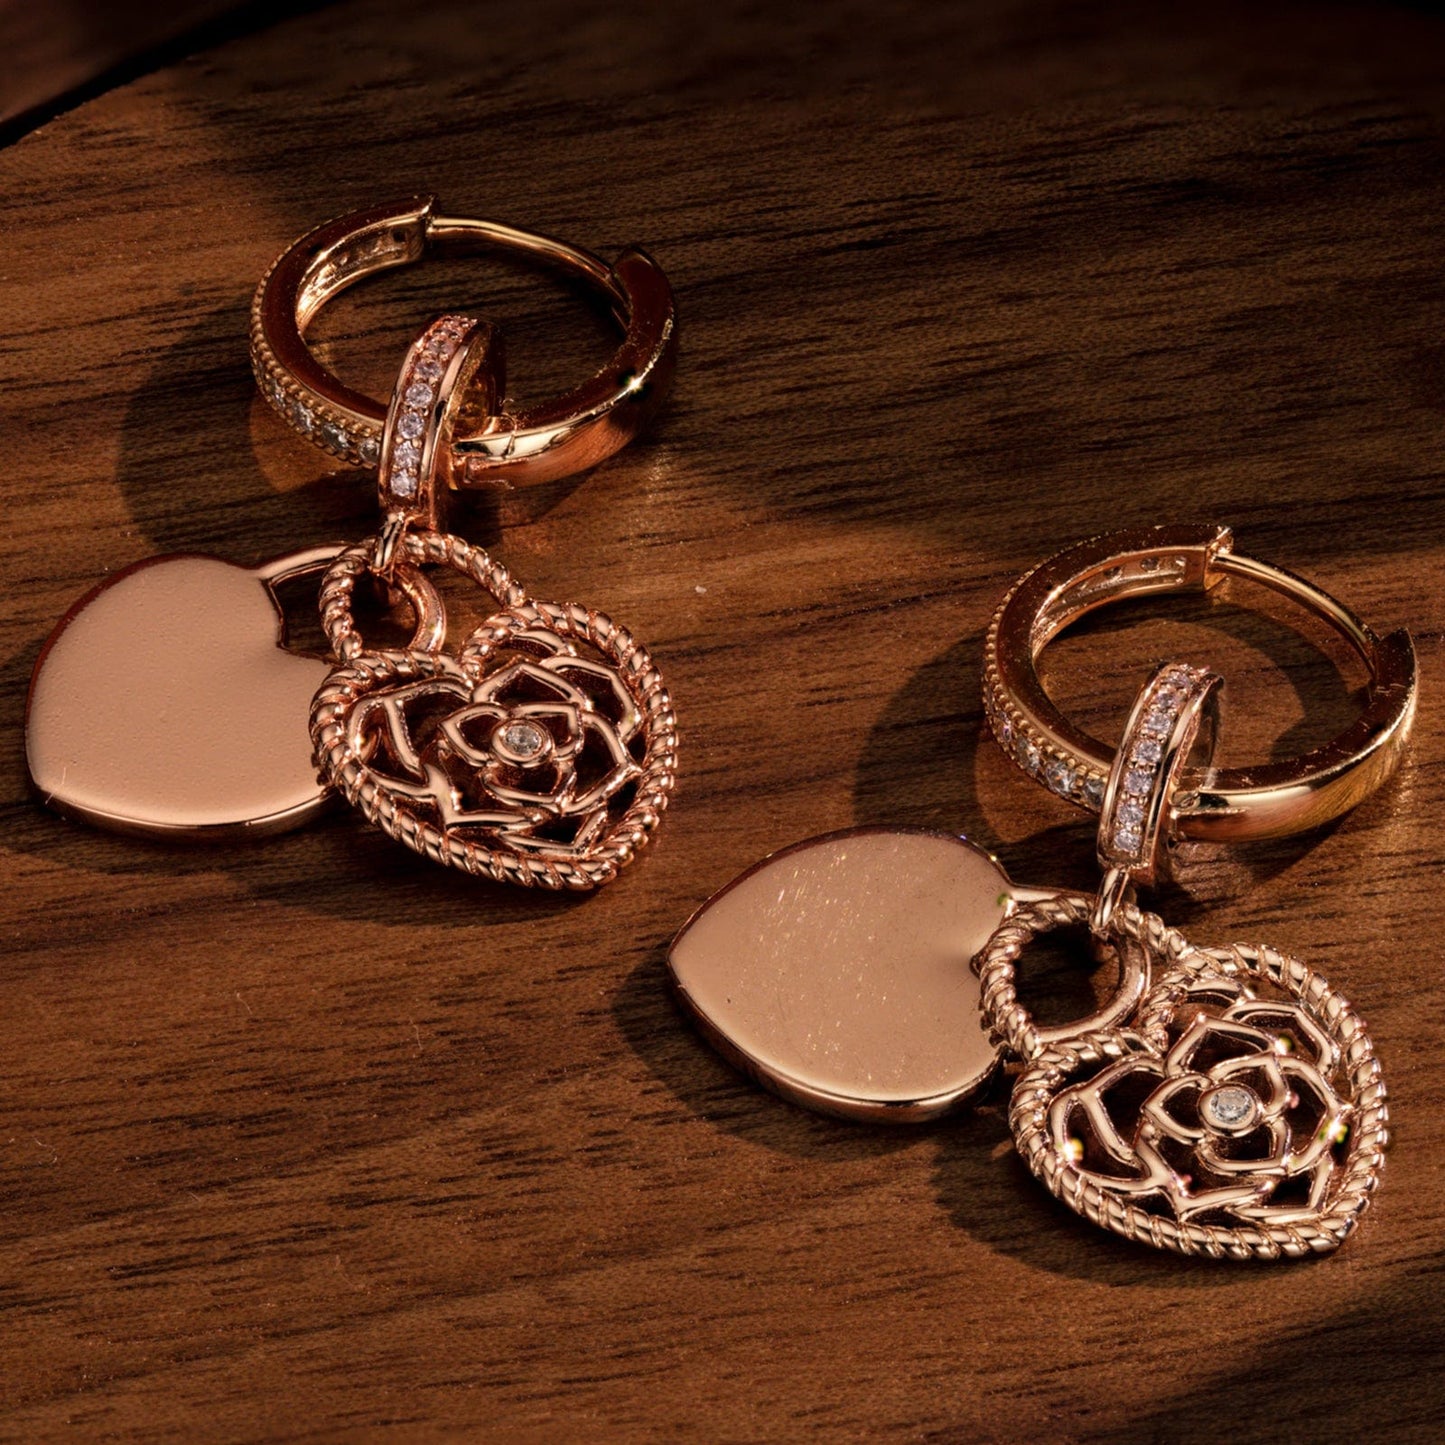 Sterling Silver Lock Your Love Charms Earrings Set In Rose Gold Plated